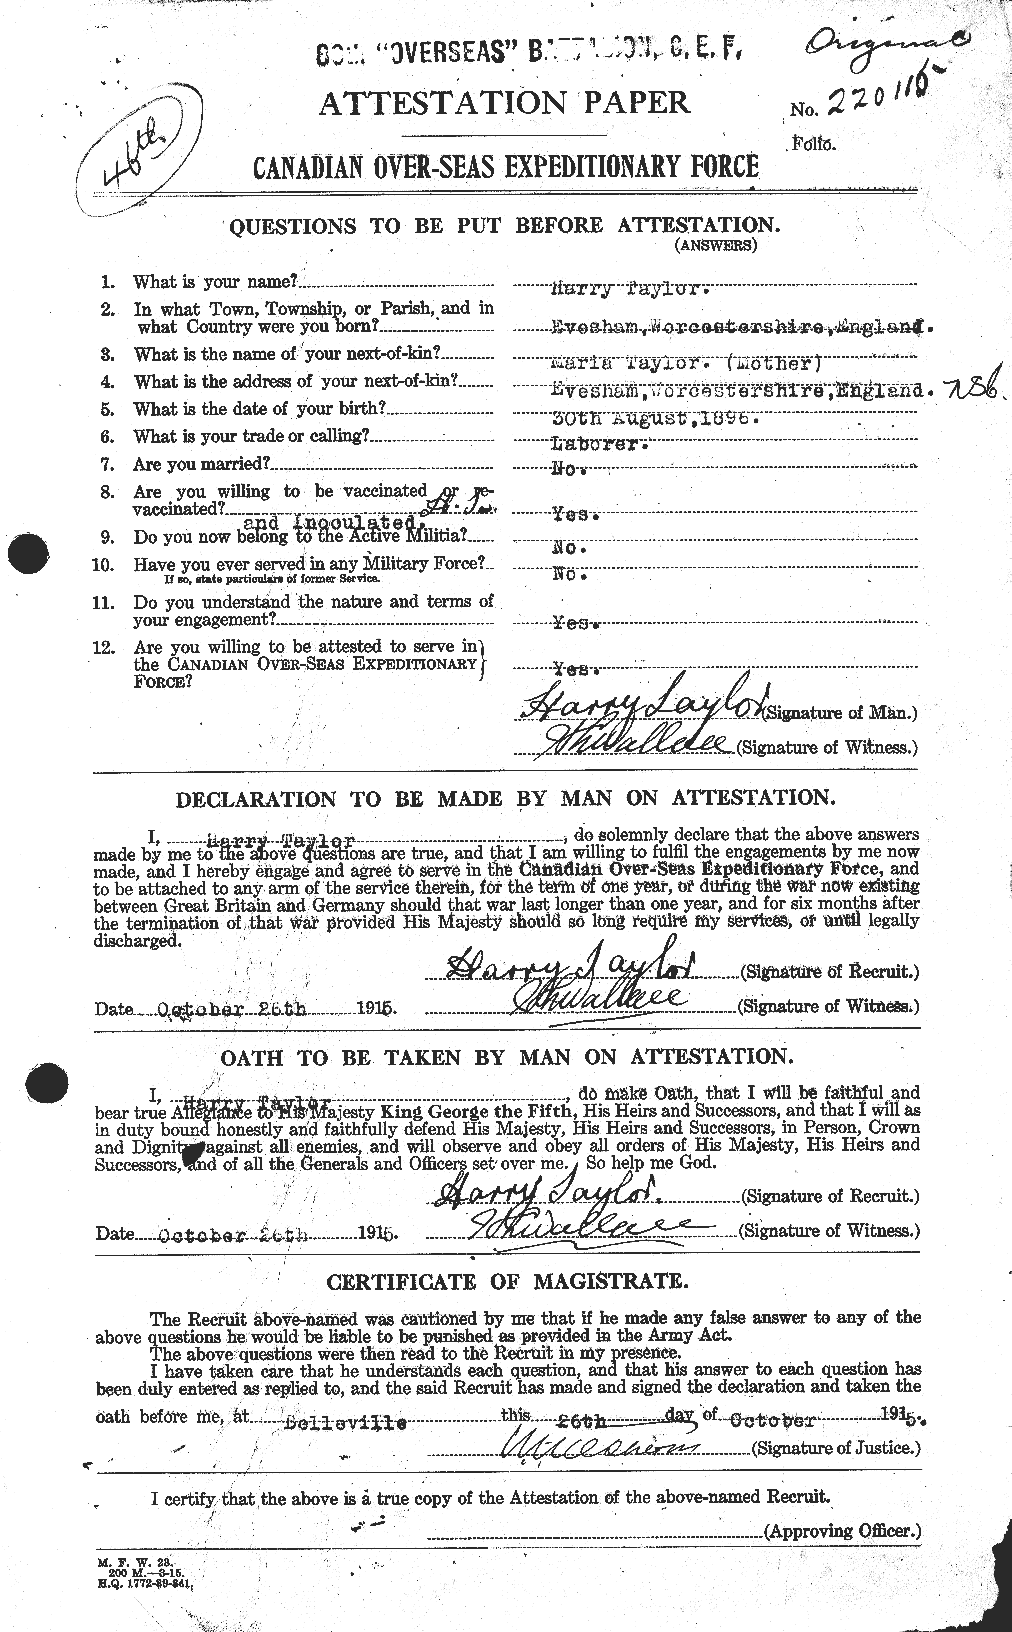 Personnel Records of the First World War - CEF 626455a